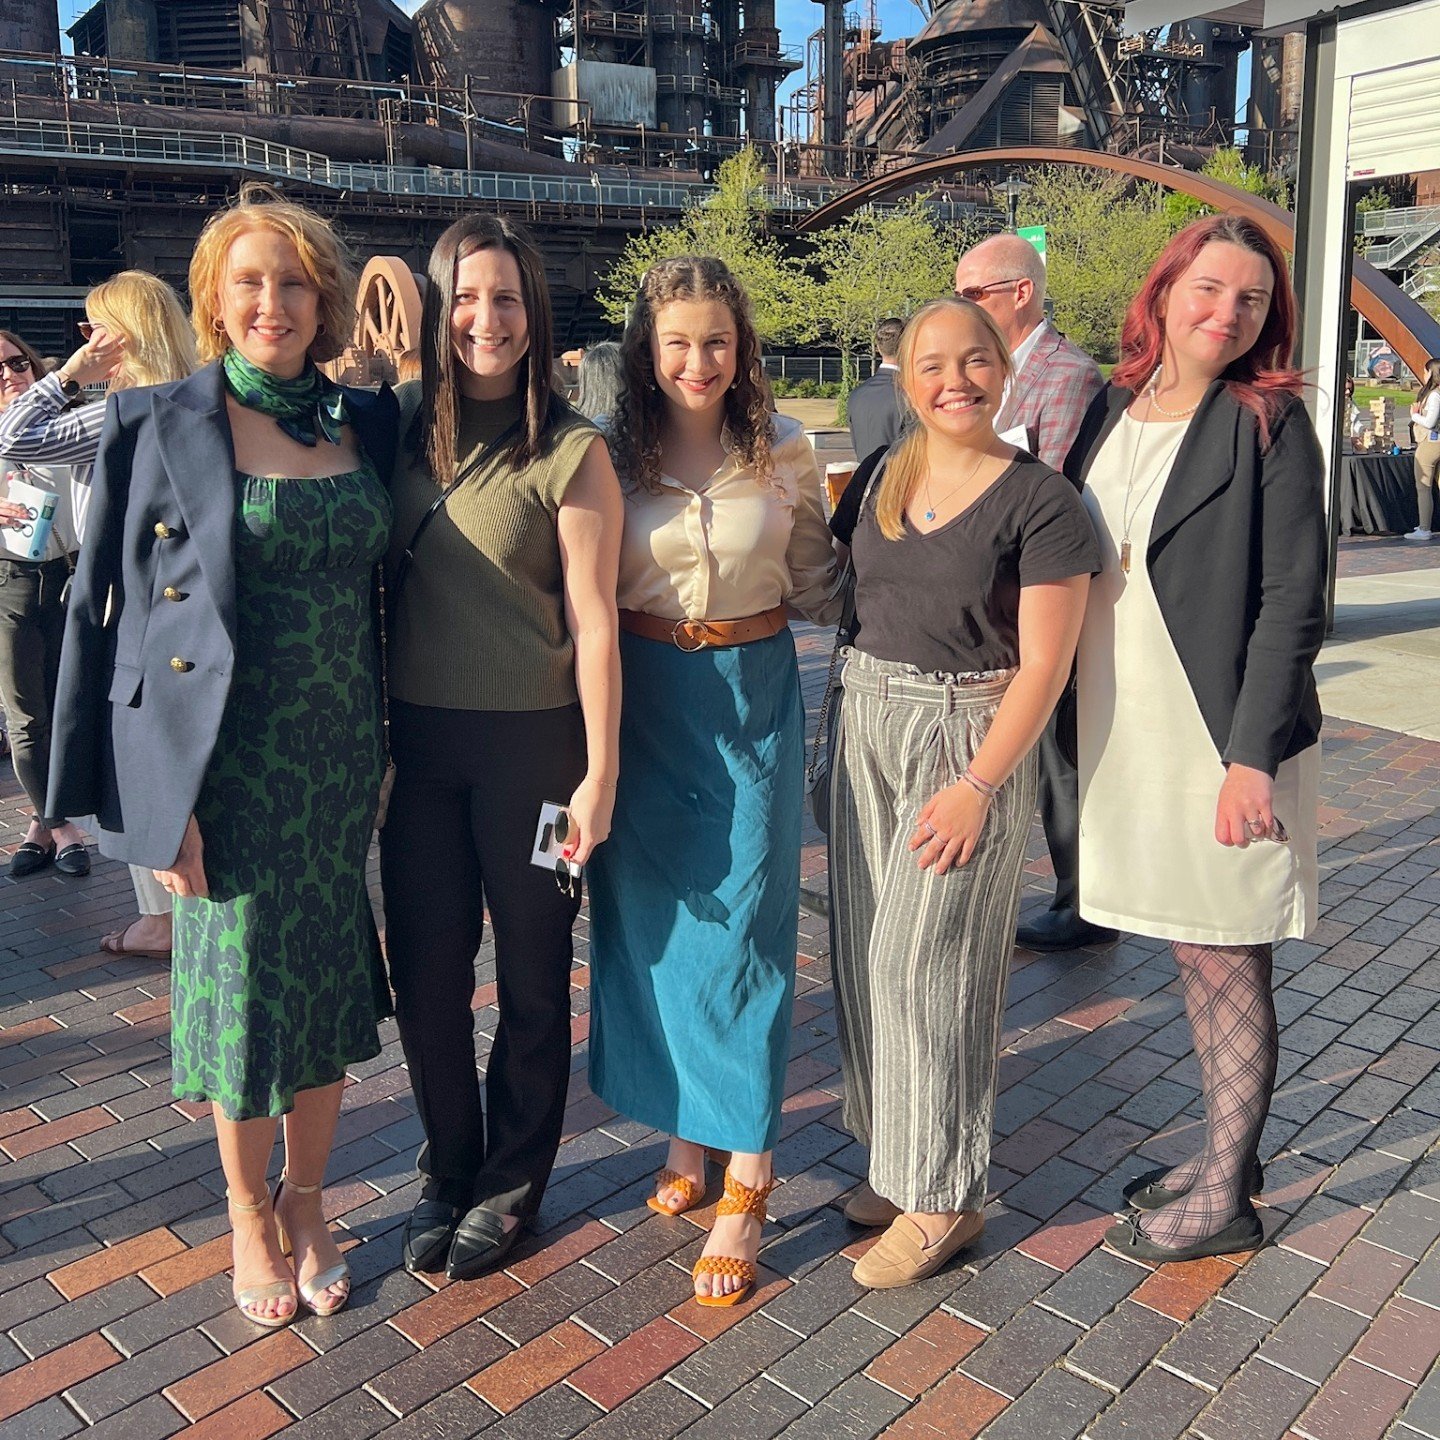 Cheers to @girlscoutsepenn 💚

Our #SocialT squad had a fantastic time at Take the Lead Lehigh Valley, hosted at @artsquest_pa, and celebrating the phenomenal #GirlScouts in our region. 

Extending our congrats to Carmen, Katarah, Danielle, and Steph